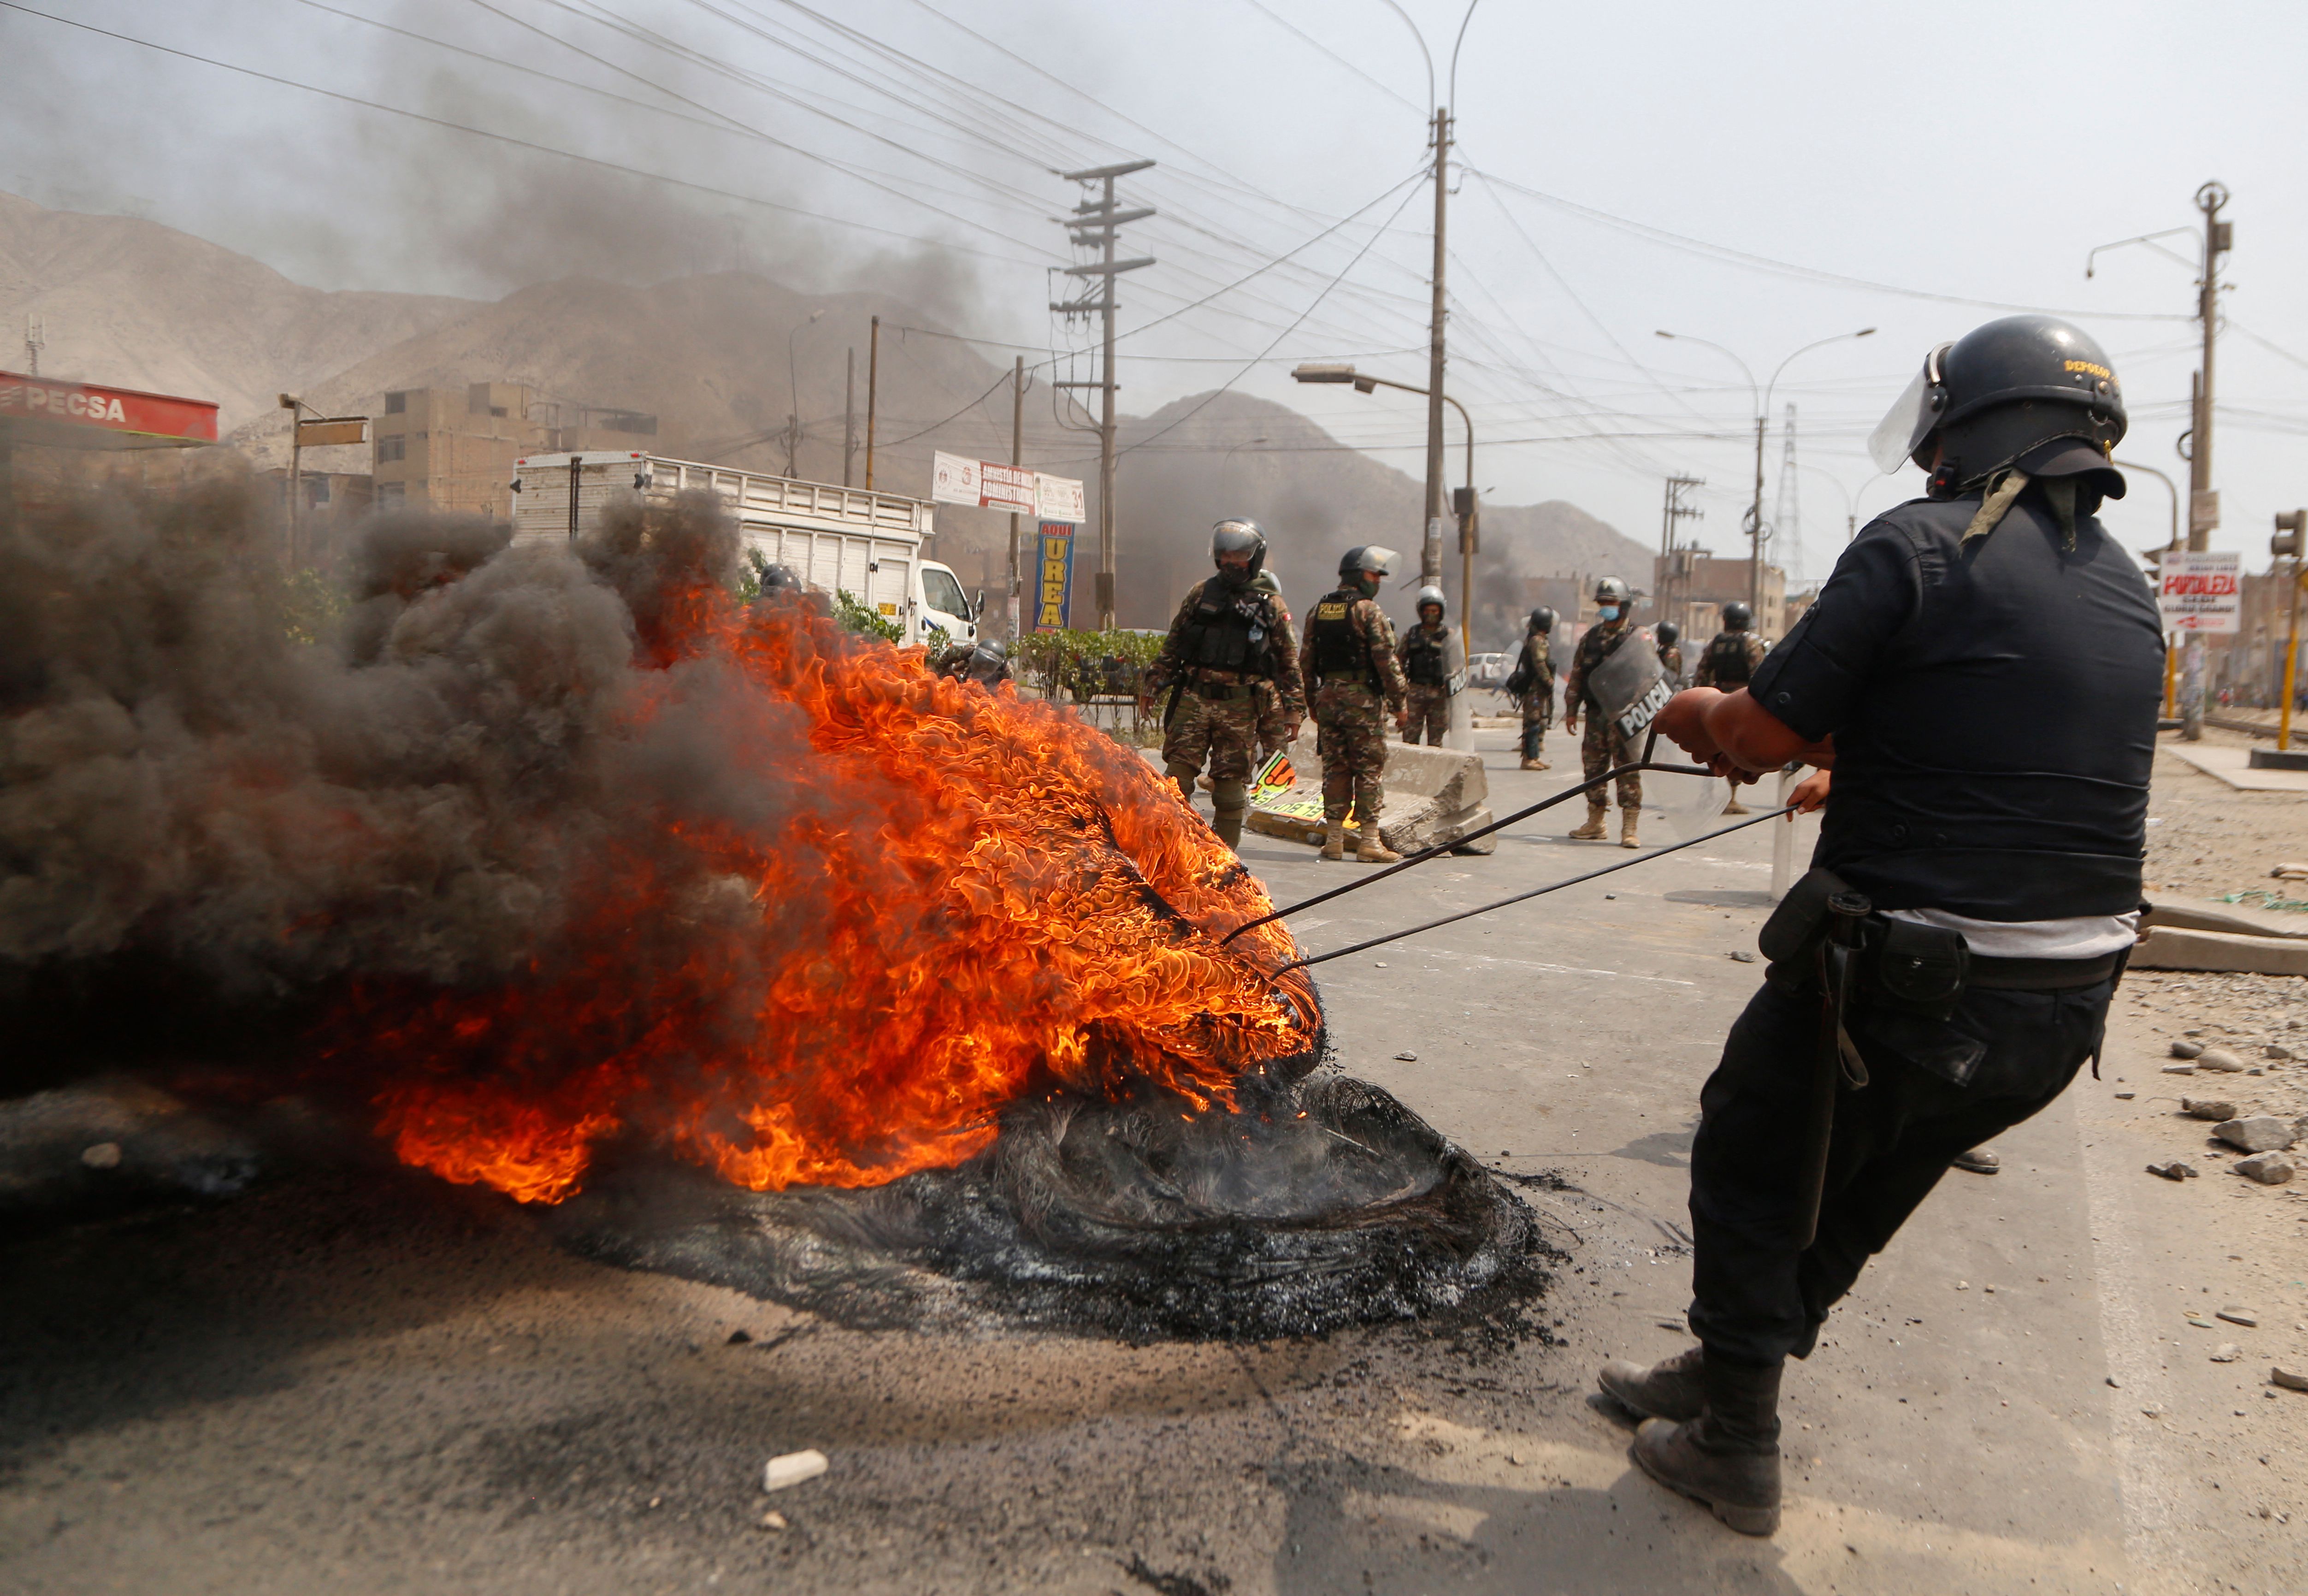 A police officer tries to extinguish a barricade set on fire during a protest in Lima on April 4.